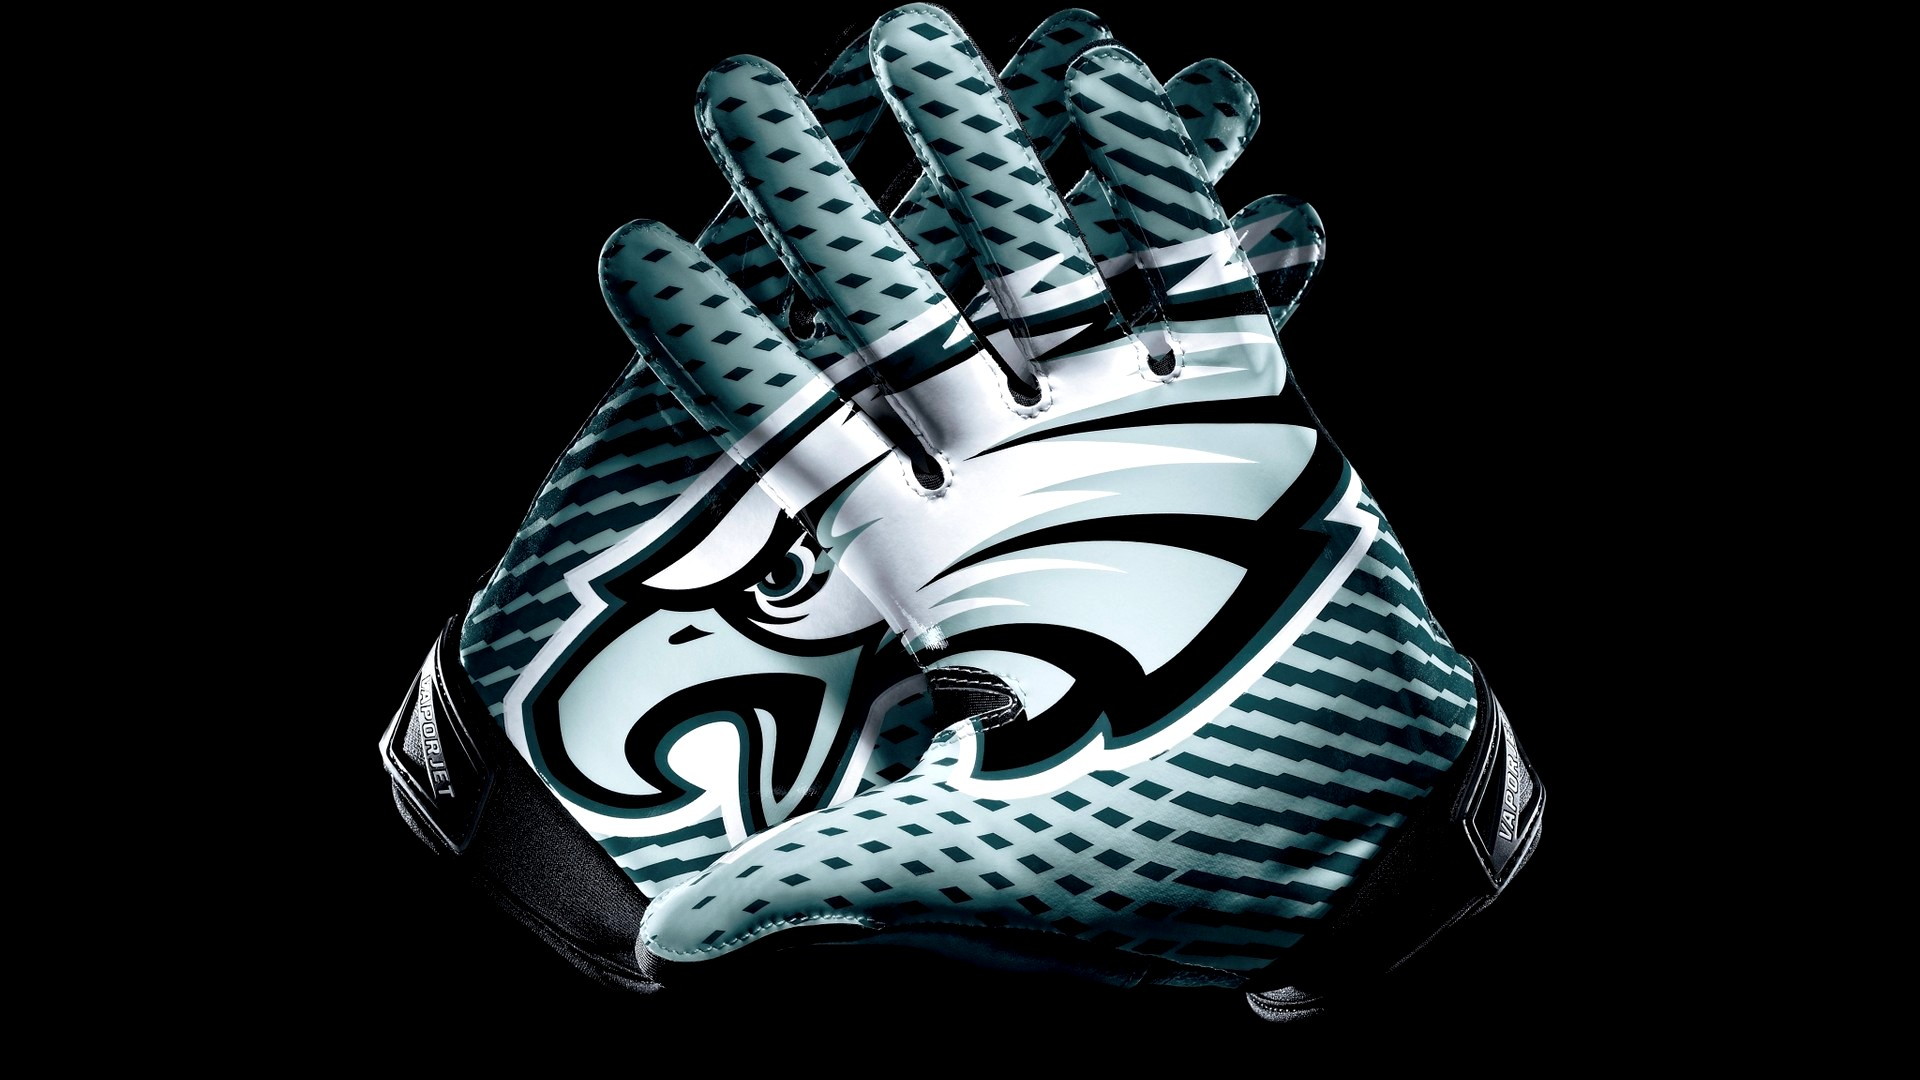 Philadelphia Eagles Wallpaper HD Laptop with high-resolution 1920x1080 pixel. You can use and set as wallpaper for Notebook Screensavers, Mac Wallpapers, Mobile Home Screen, iPhone or Android Phones Lock Screen